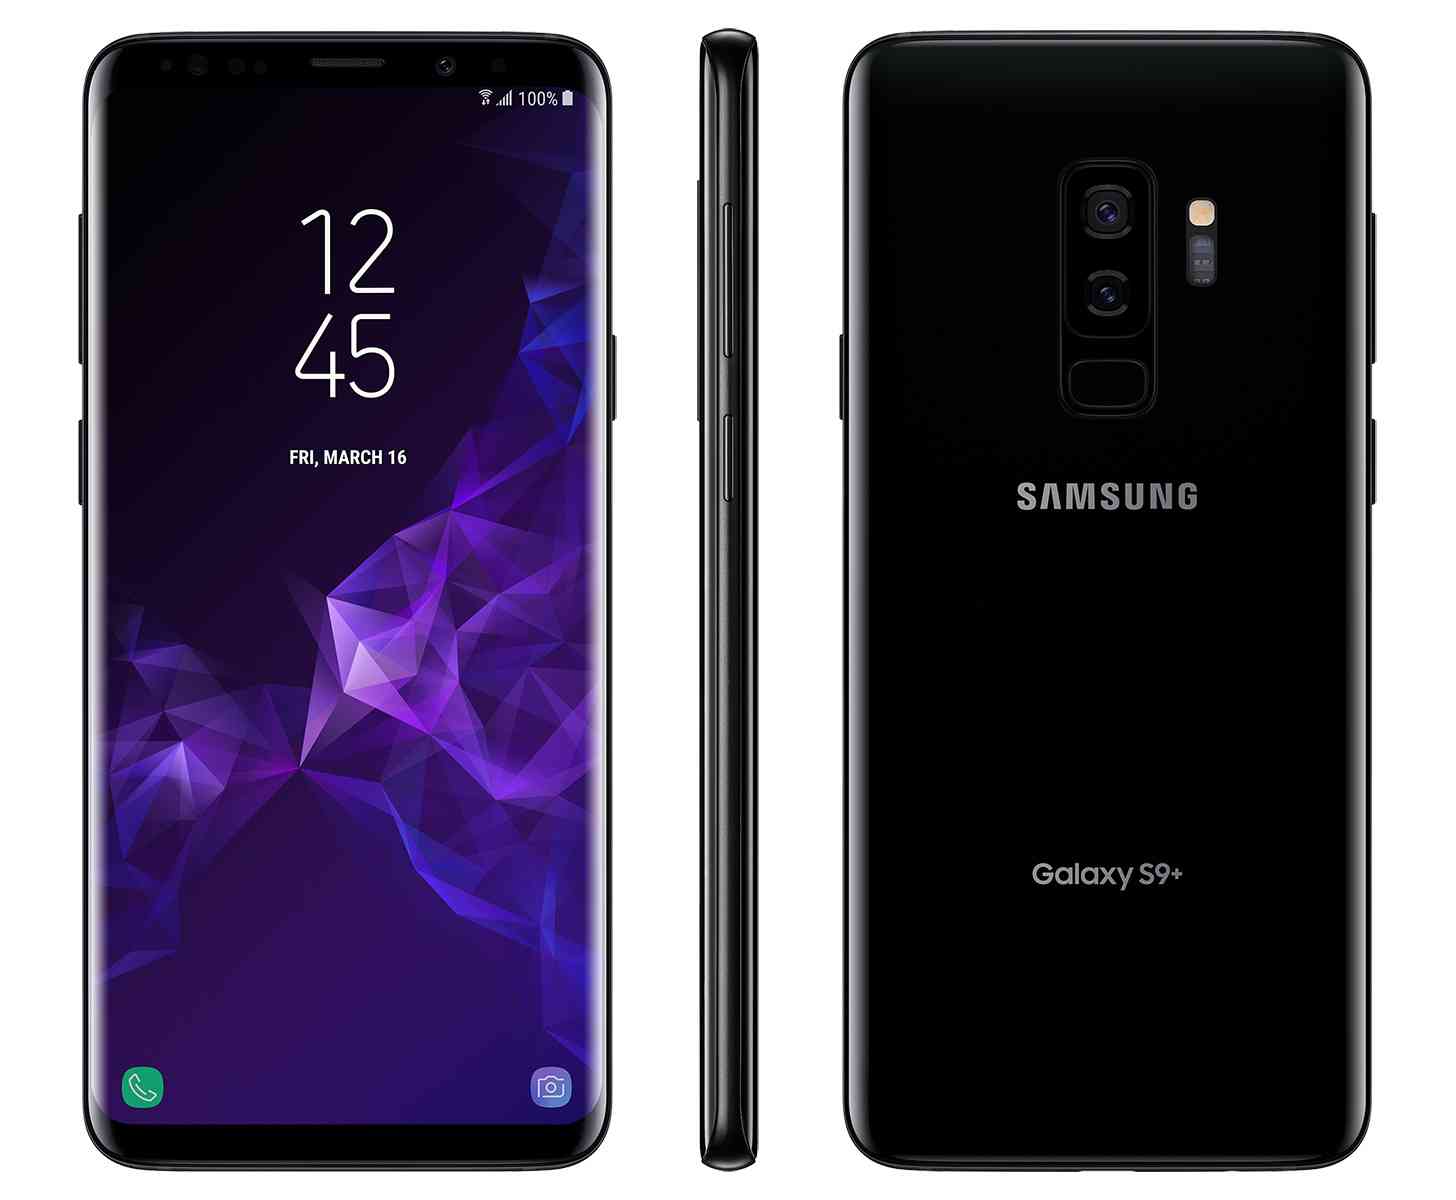 Samsung Galaxy S9+ group official images